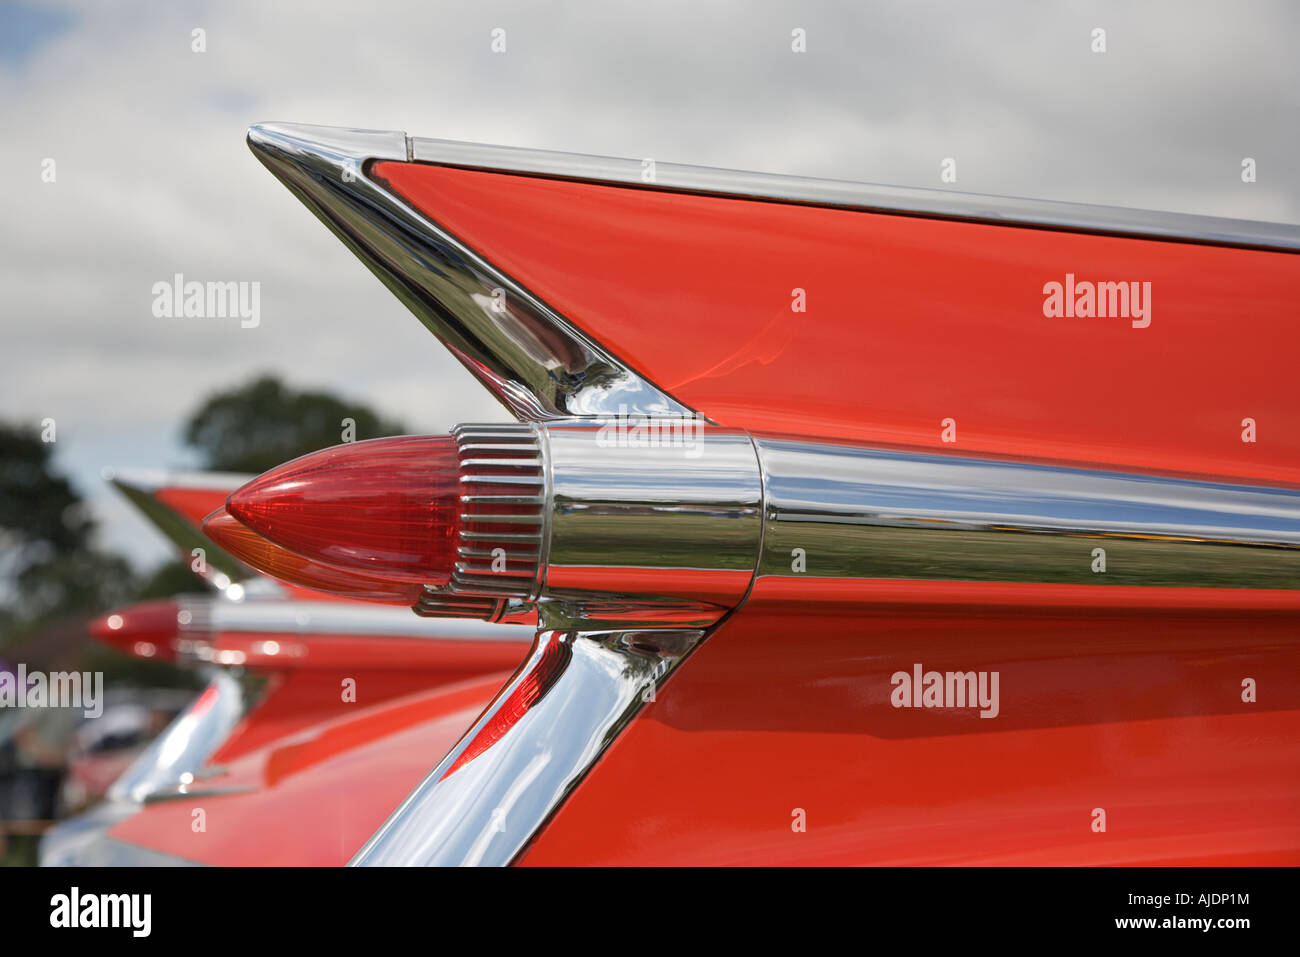 Fins and rear lights of Cadillac Coupe de Ville car Stock Photo